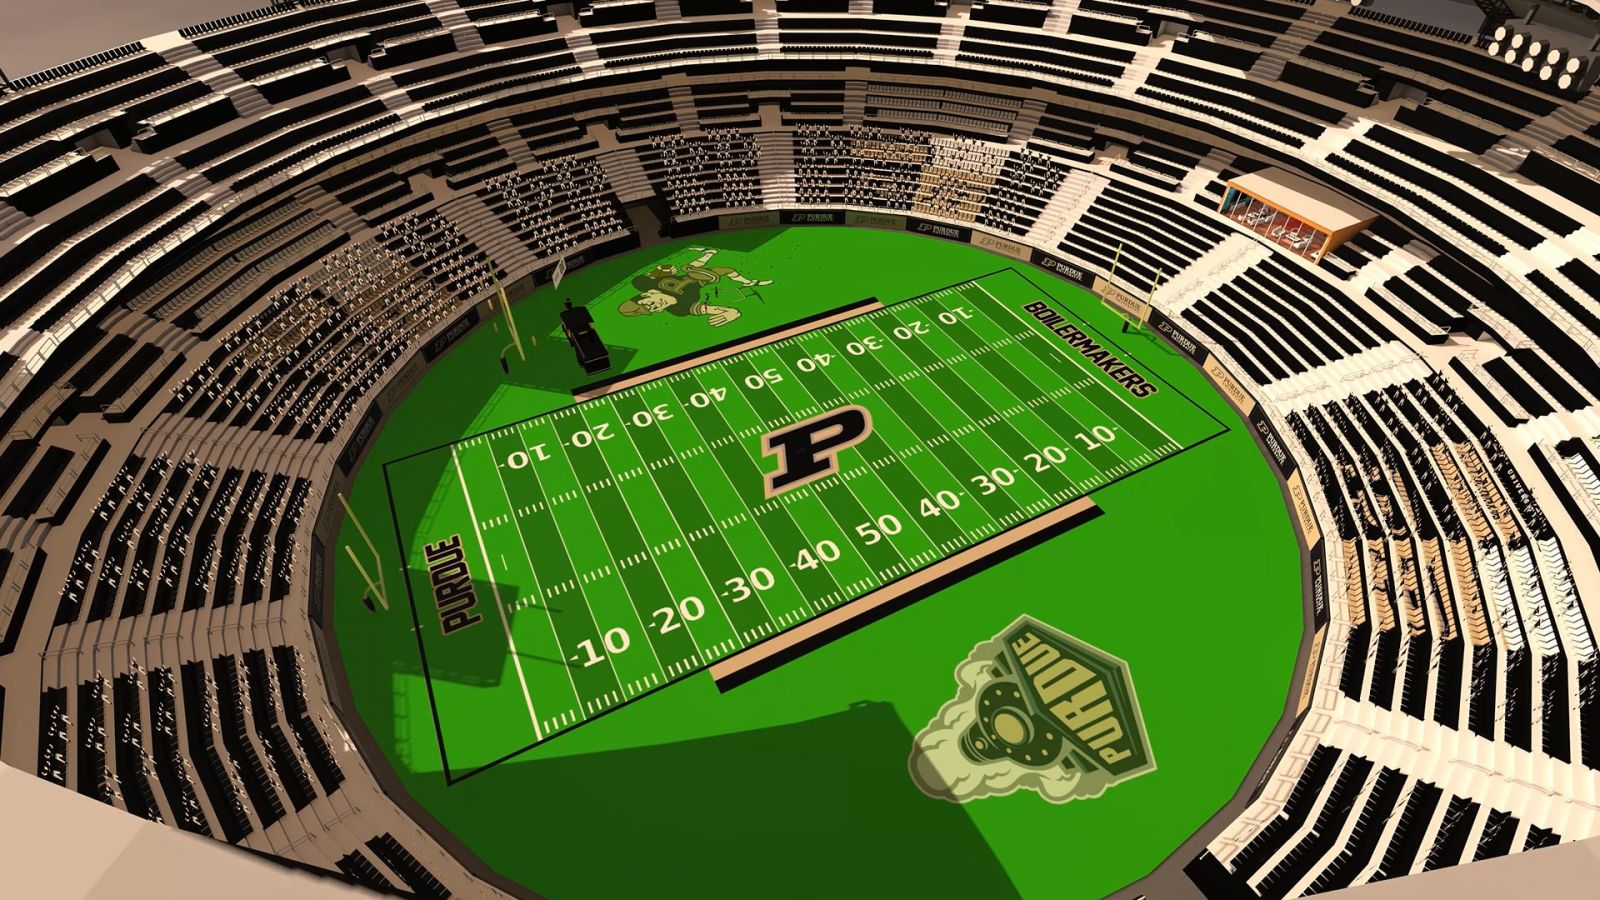 Aerial view of Ross-Ade Stadium, as rendered in the Dream Futures extended-reality game interface. This interface uses the Unity game engine as the baseline software, with in-game objects and other assets provided by Iconic Engine. (Courtesy of Iconic Engine)